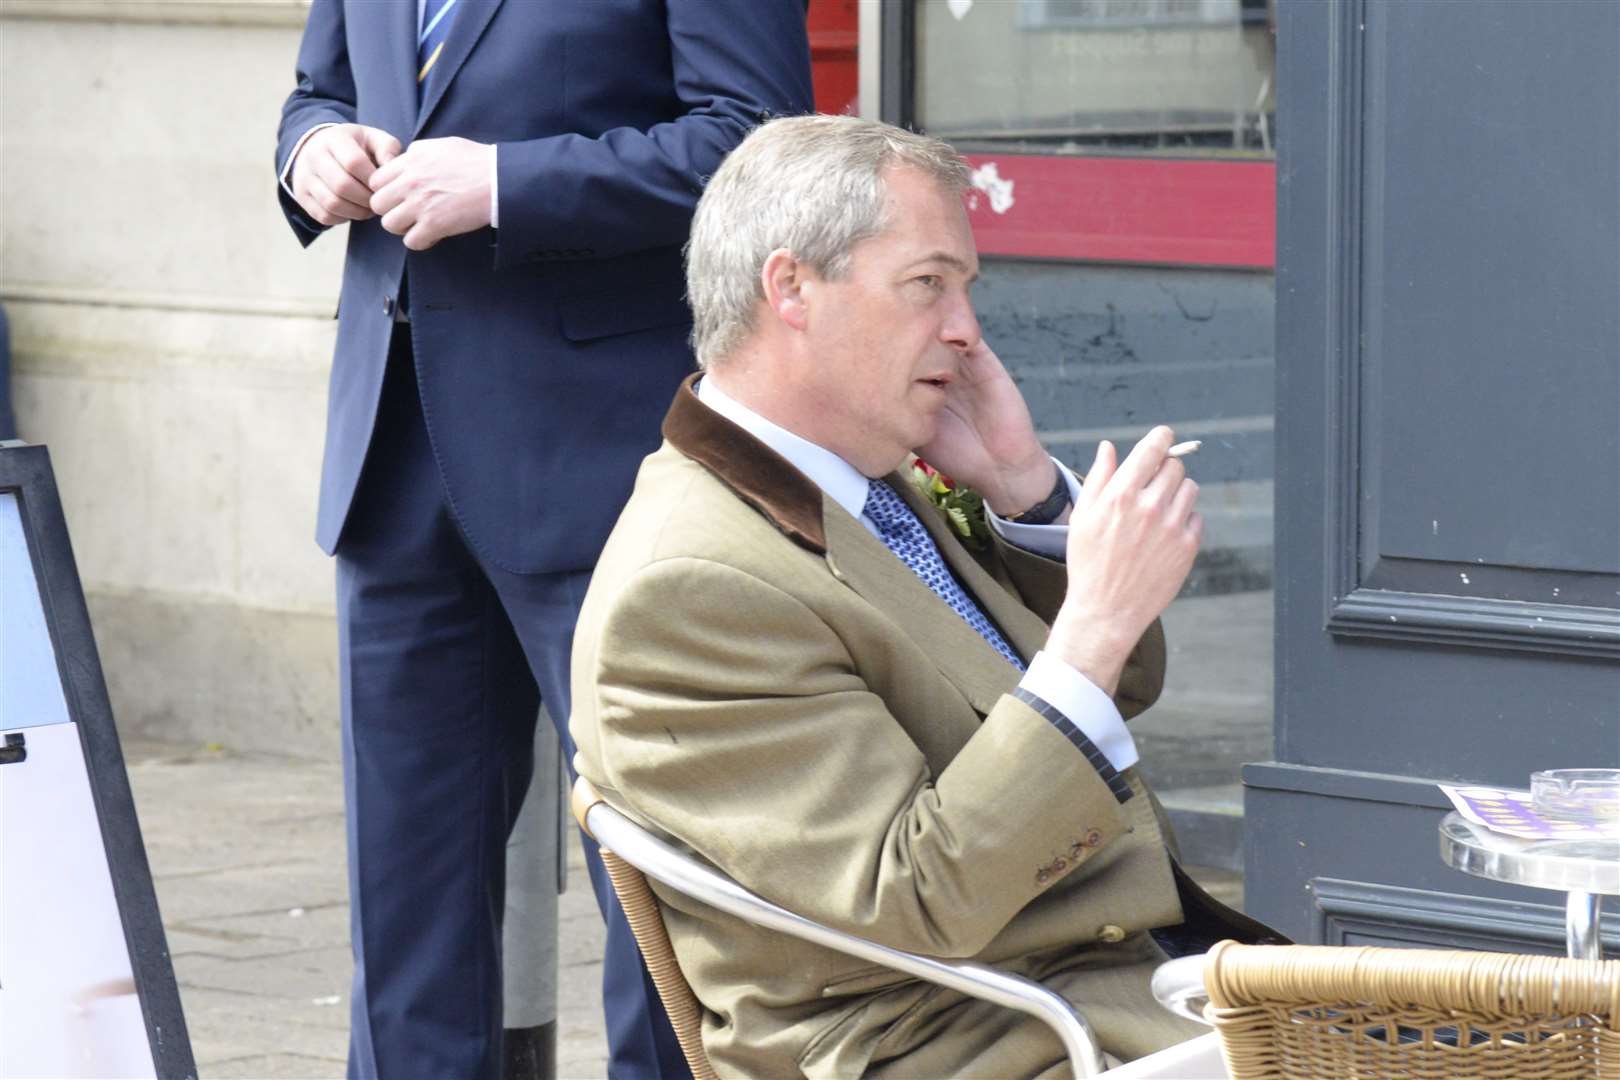 Ukip leader Nigel Farage takes a break to make a call outside Cafe Nero in Ramsgate town centre